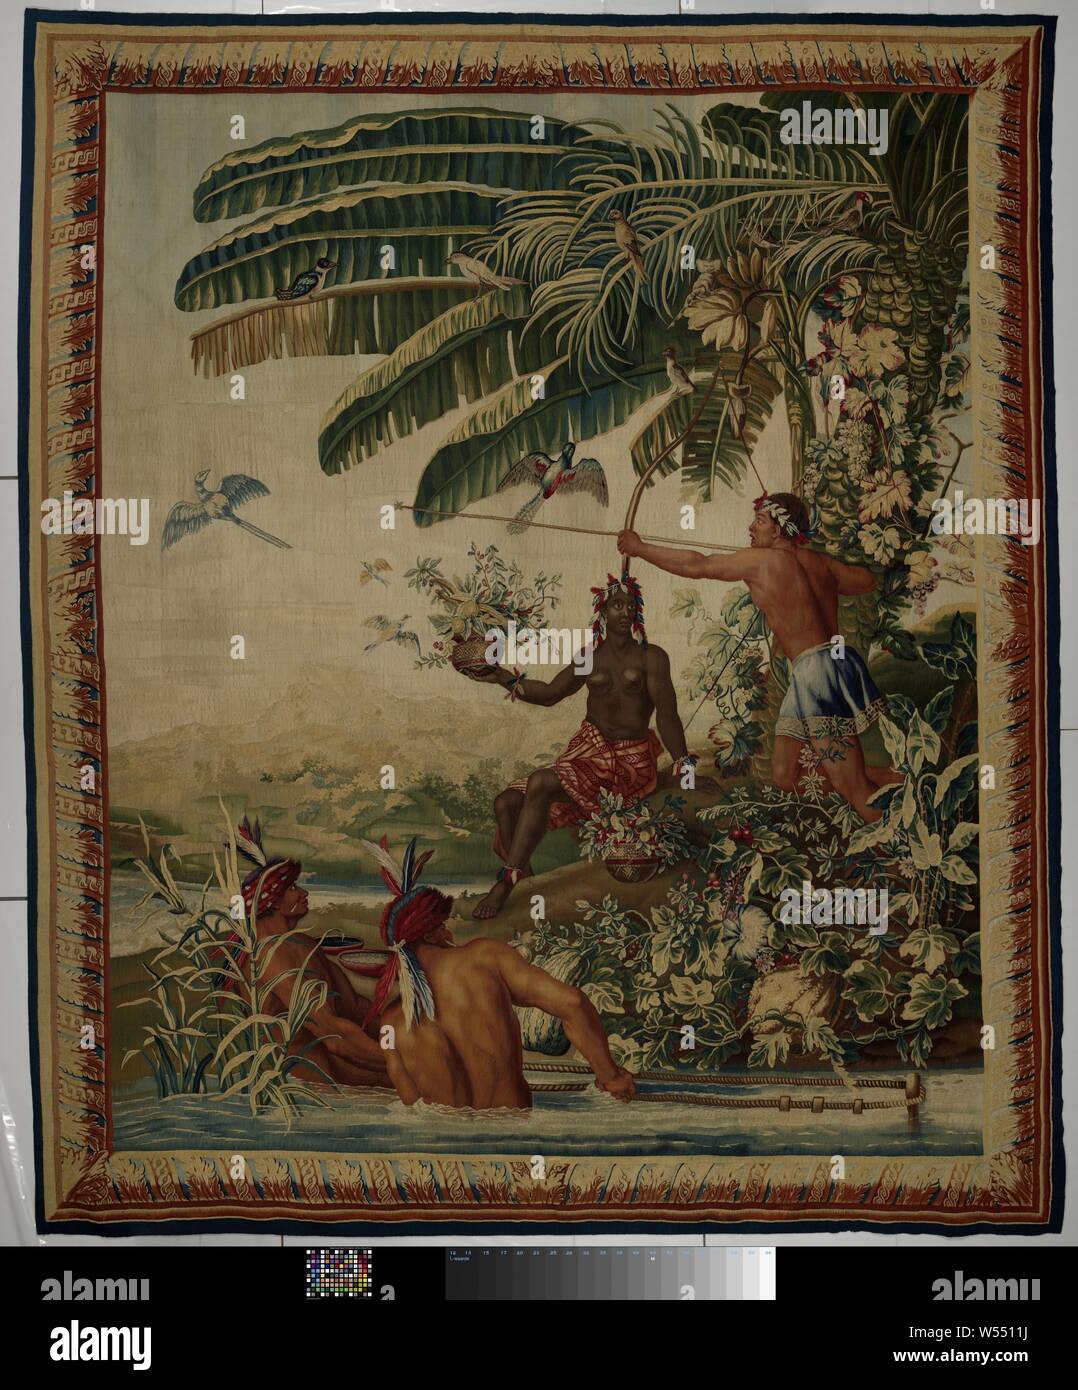 Les pêcheurs (The Fishermen), Tapestry from Les Anciennes Indes